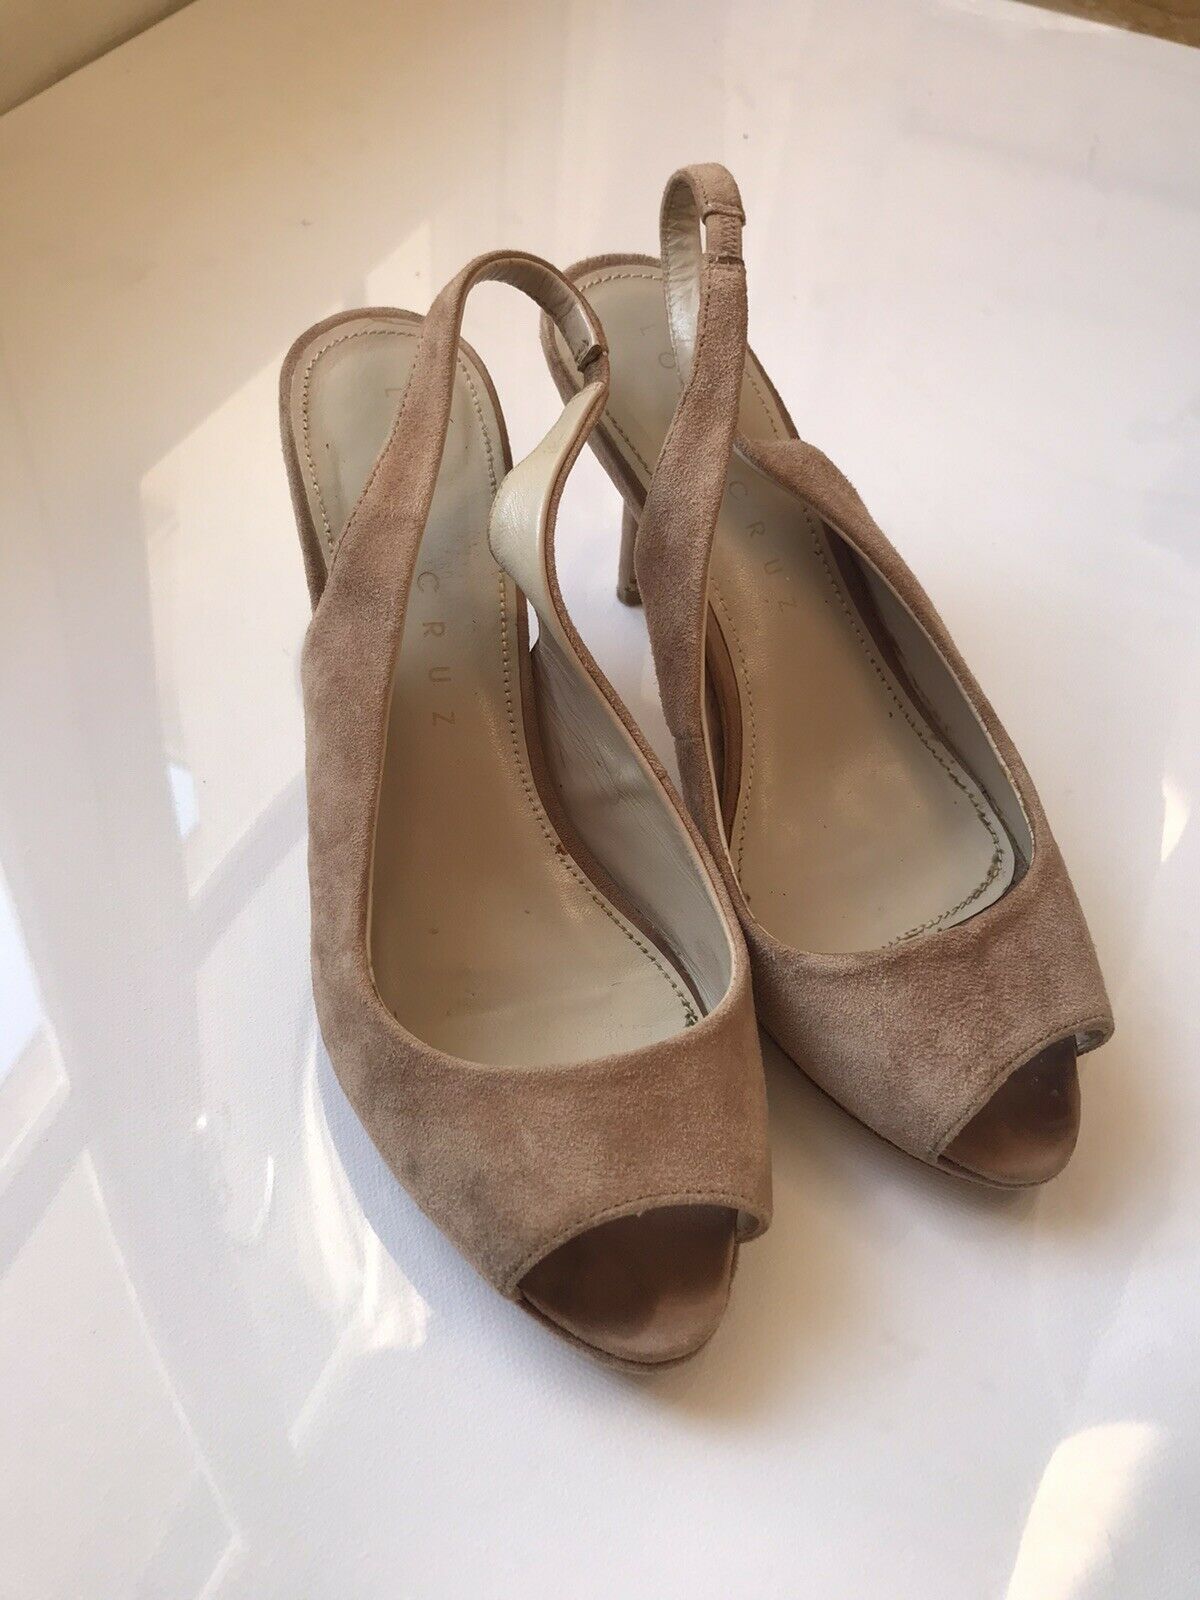 Suede Leather Shoes Beige Lola Crus Heels Size US 8/euro39 Made In Spain